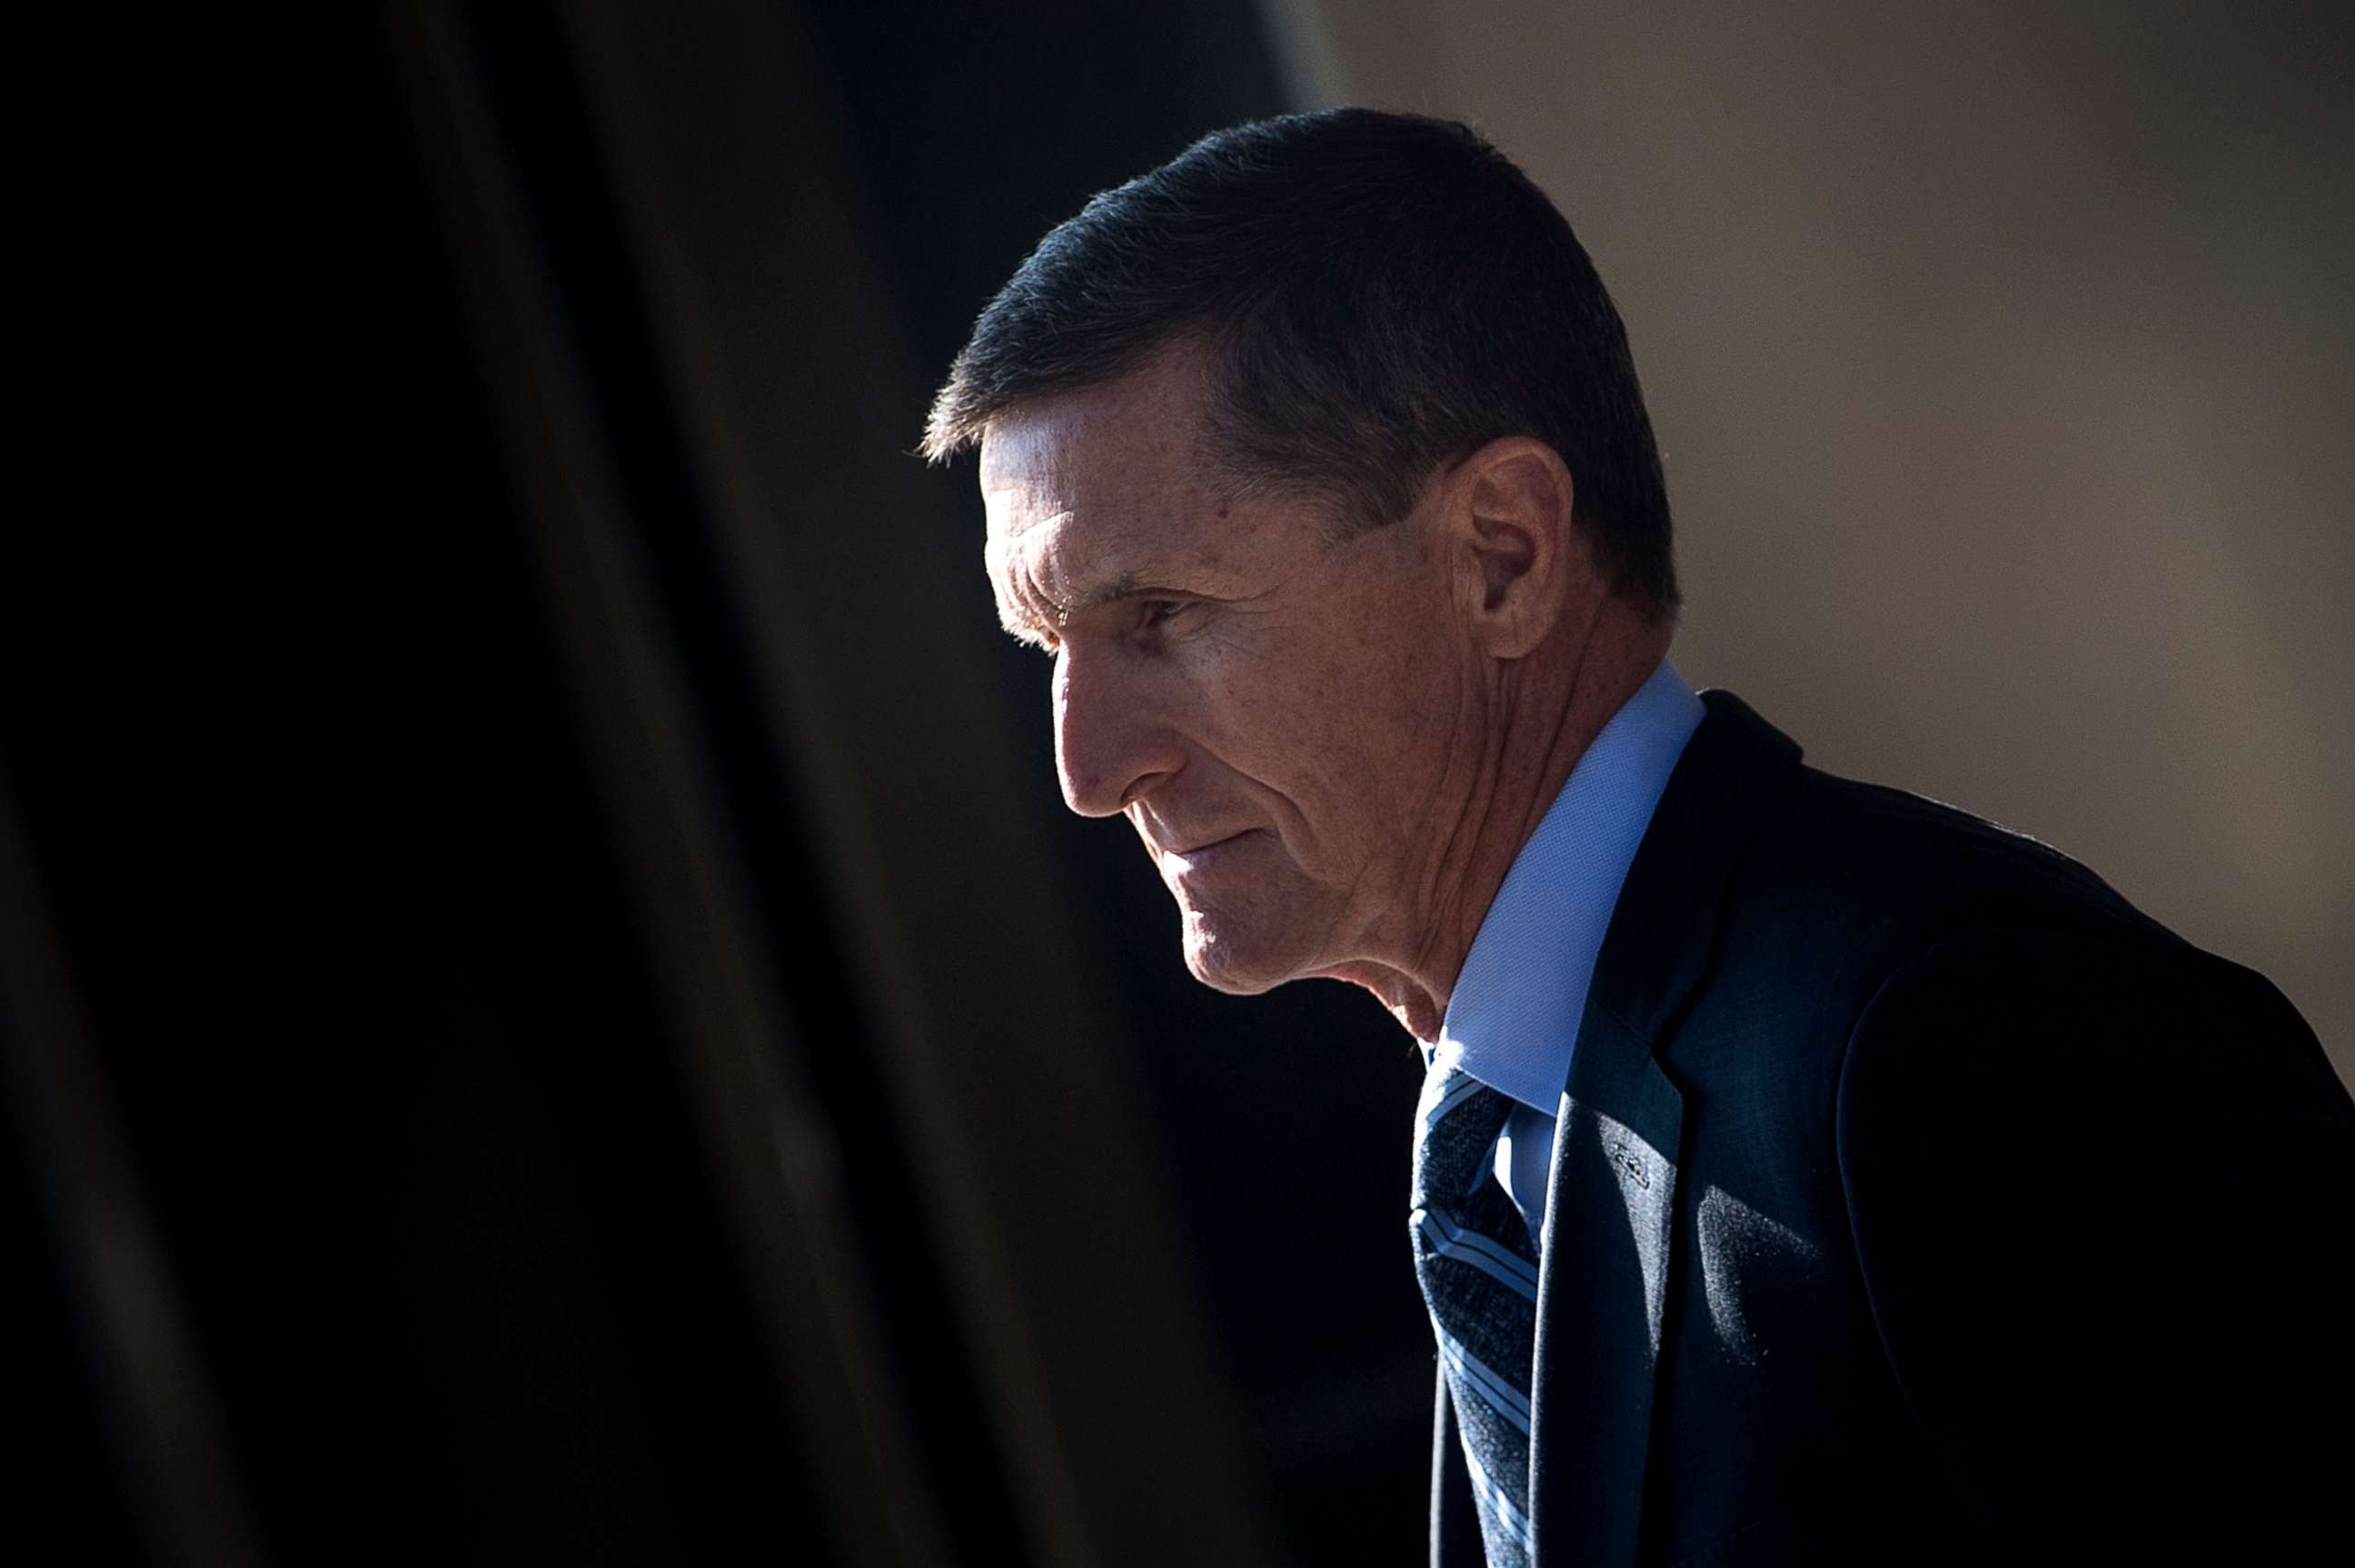 PHOTO: Gen. Michael Flynn, former national security adviser to US President Donald Trump, leaves Federal Court in Washington, D.C., Dec. 1, 2017.